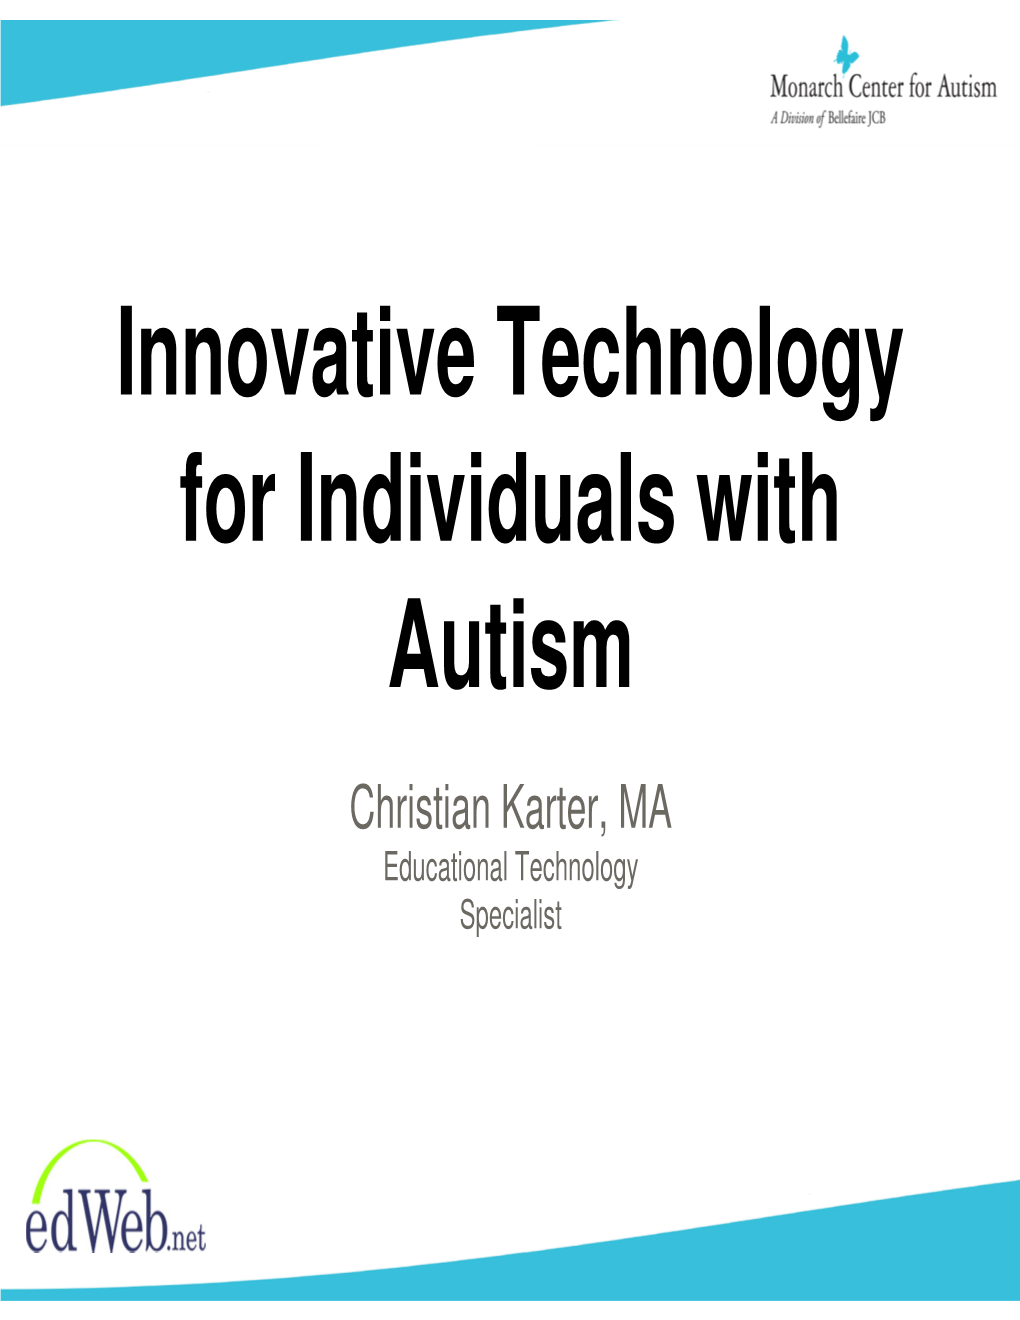 Innovative Technology for Individuals with Autism